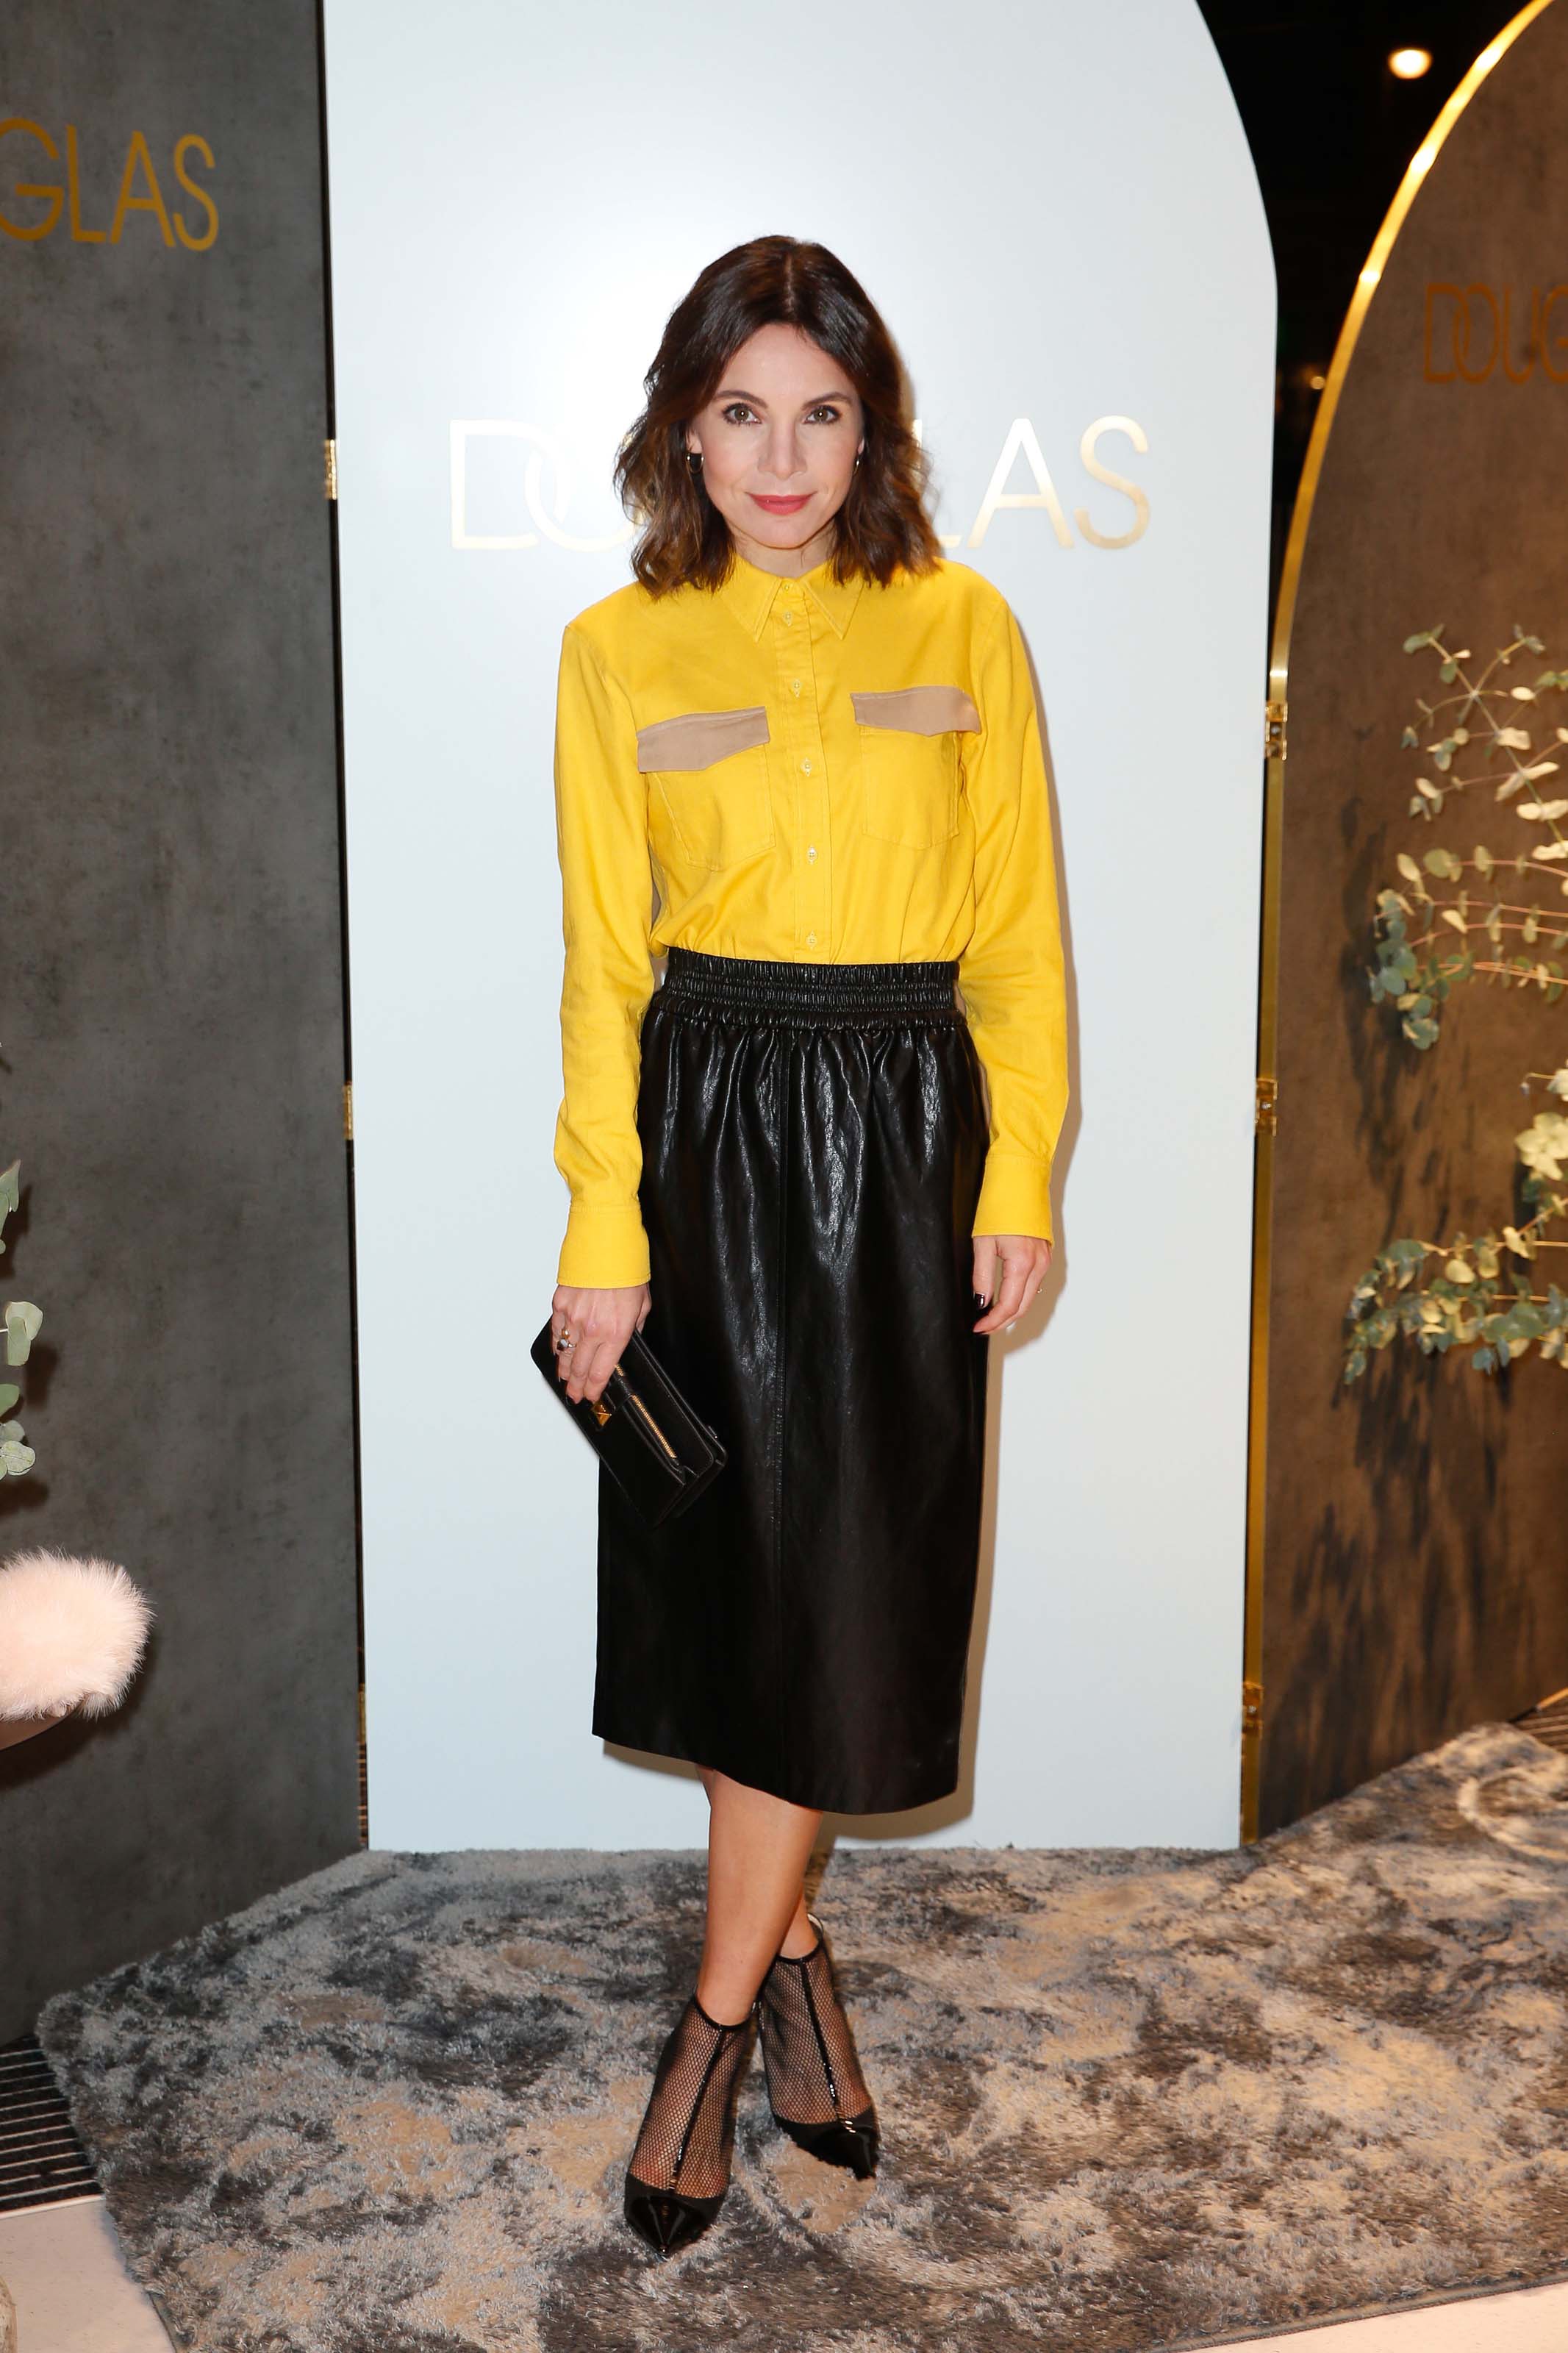 Nadine Warmuth attends Douglas Flagship Store Opening